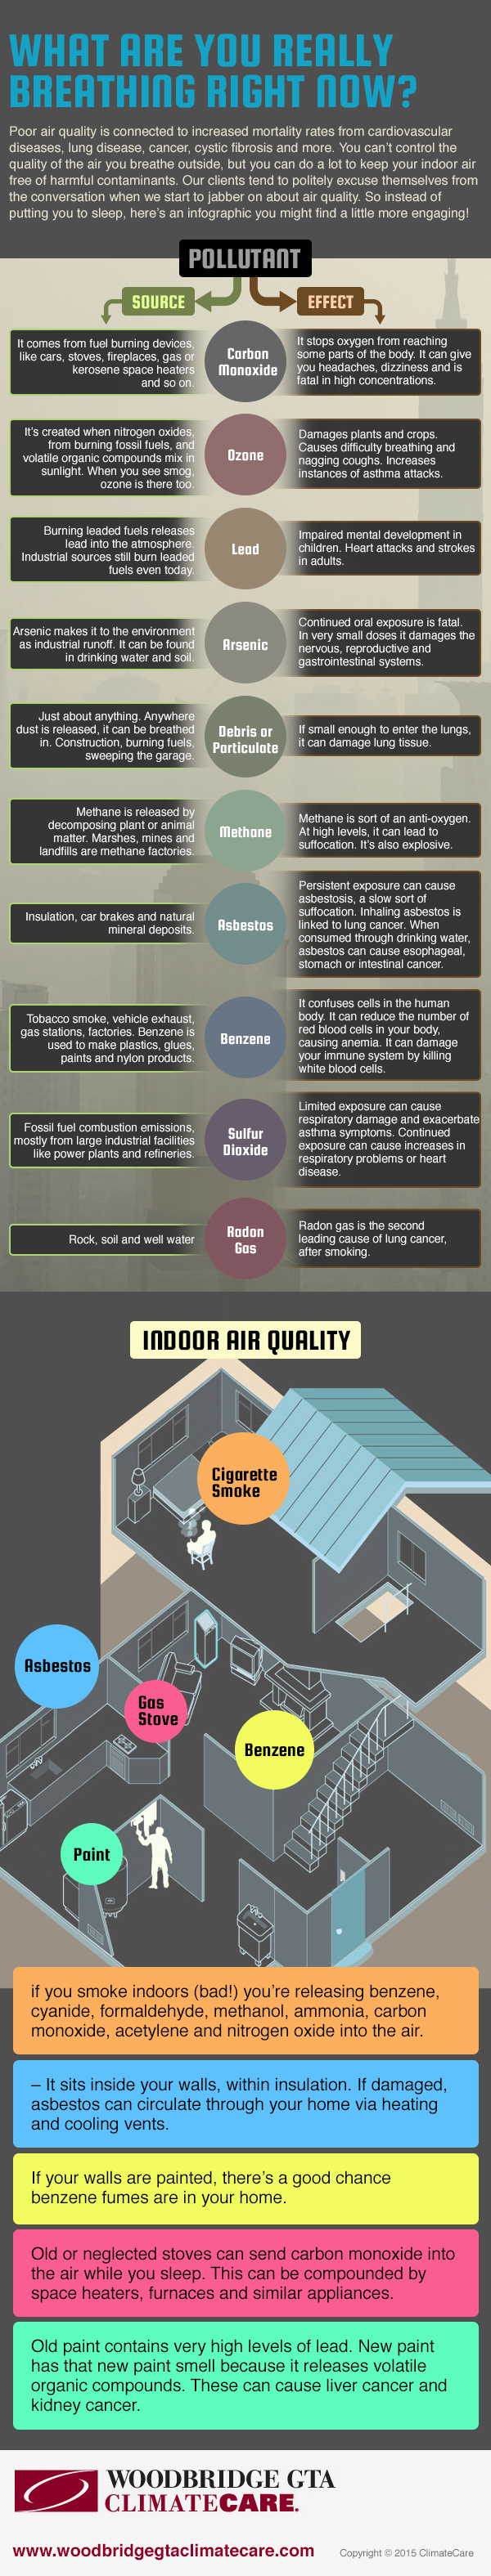 Indoor air quality - what are you breathing in? Infographic on indoor air pollutants